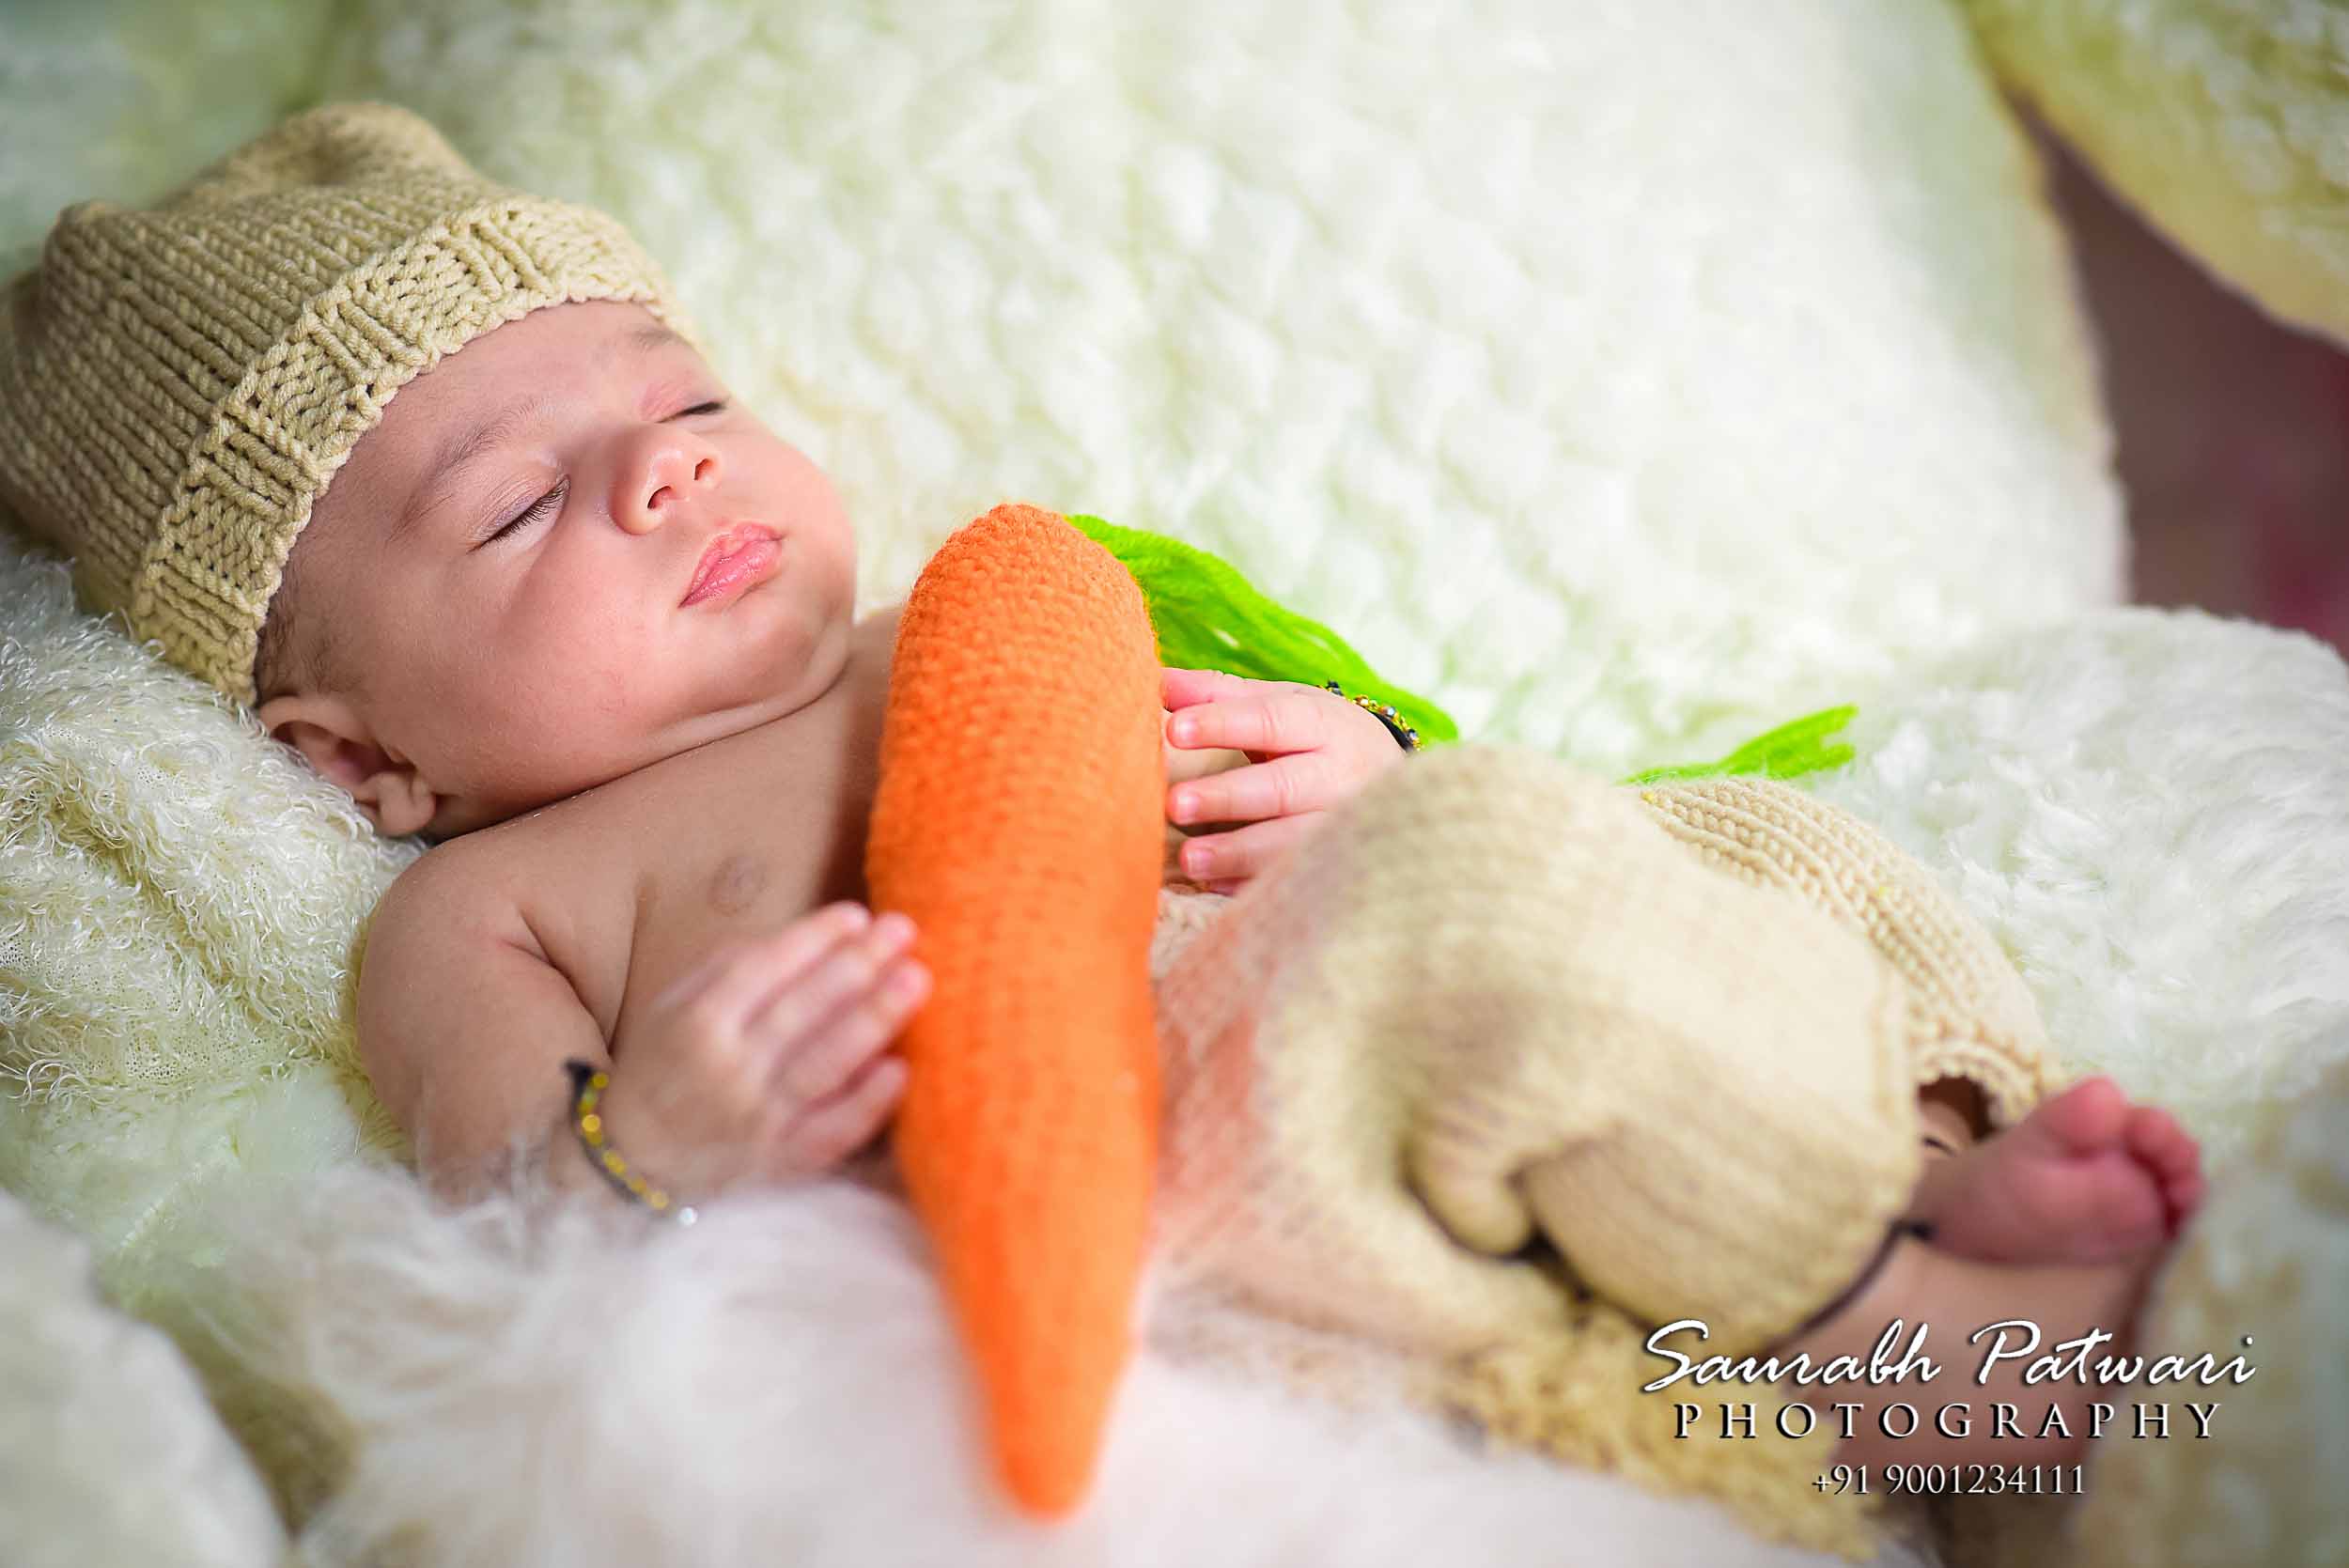 New Born Baby Photography in Udaipur, Acting Portfolio in Udaipur, Best candid, destination wedding photographers in Udaipur, pre-wedding, wedding, films/highlights, maternity/pregnancy, kids, family, fashion, portfolio event photography, Best Candid Wedding Photographers in Udaipur, Best Destination Wedding Photographers in Udaipur, Best pre-wedding photography, wedding cinematography in Udaipur, Photocare, Best Wedding Photographer in Udaipur established in 1995 Udaipur, Rajasthan based company, Specialize in Cinematic wedding film, candid photography, unique, expressive portfolio, events, best moments, memories, Expertise, Craftsmanship, mordenize, hi-end technology, holistically event, theme, Ceremony, Professional Pre-wedding Shoots Photographers in Udaipur, Hire the best Pre-wedding Shoots,Photographers, Photo Studios in Udaipur, Checkout photographer's portfolio online at photographers, India's largest Photographers Directory, Pre-wedding Shoots, photoshoot collections, ratings, prices, list of Best Wedding Photographers in Udaipur, premiu